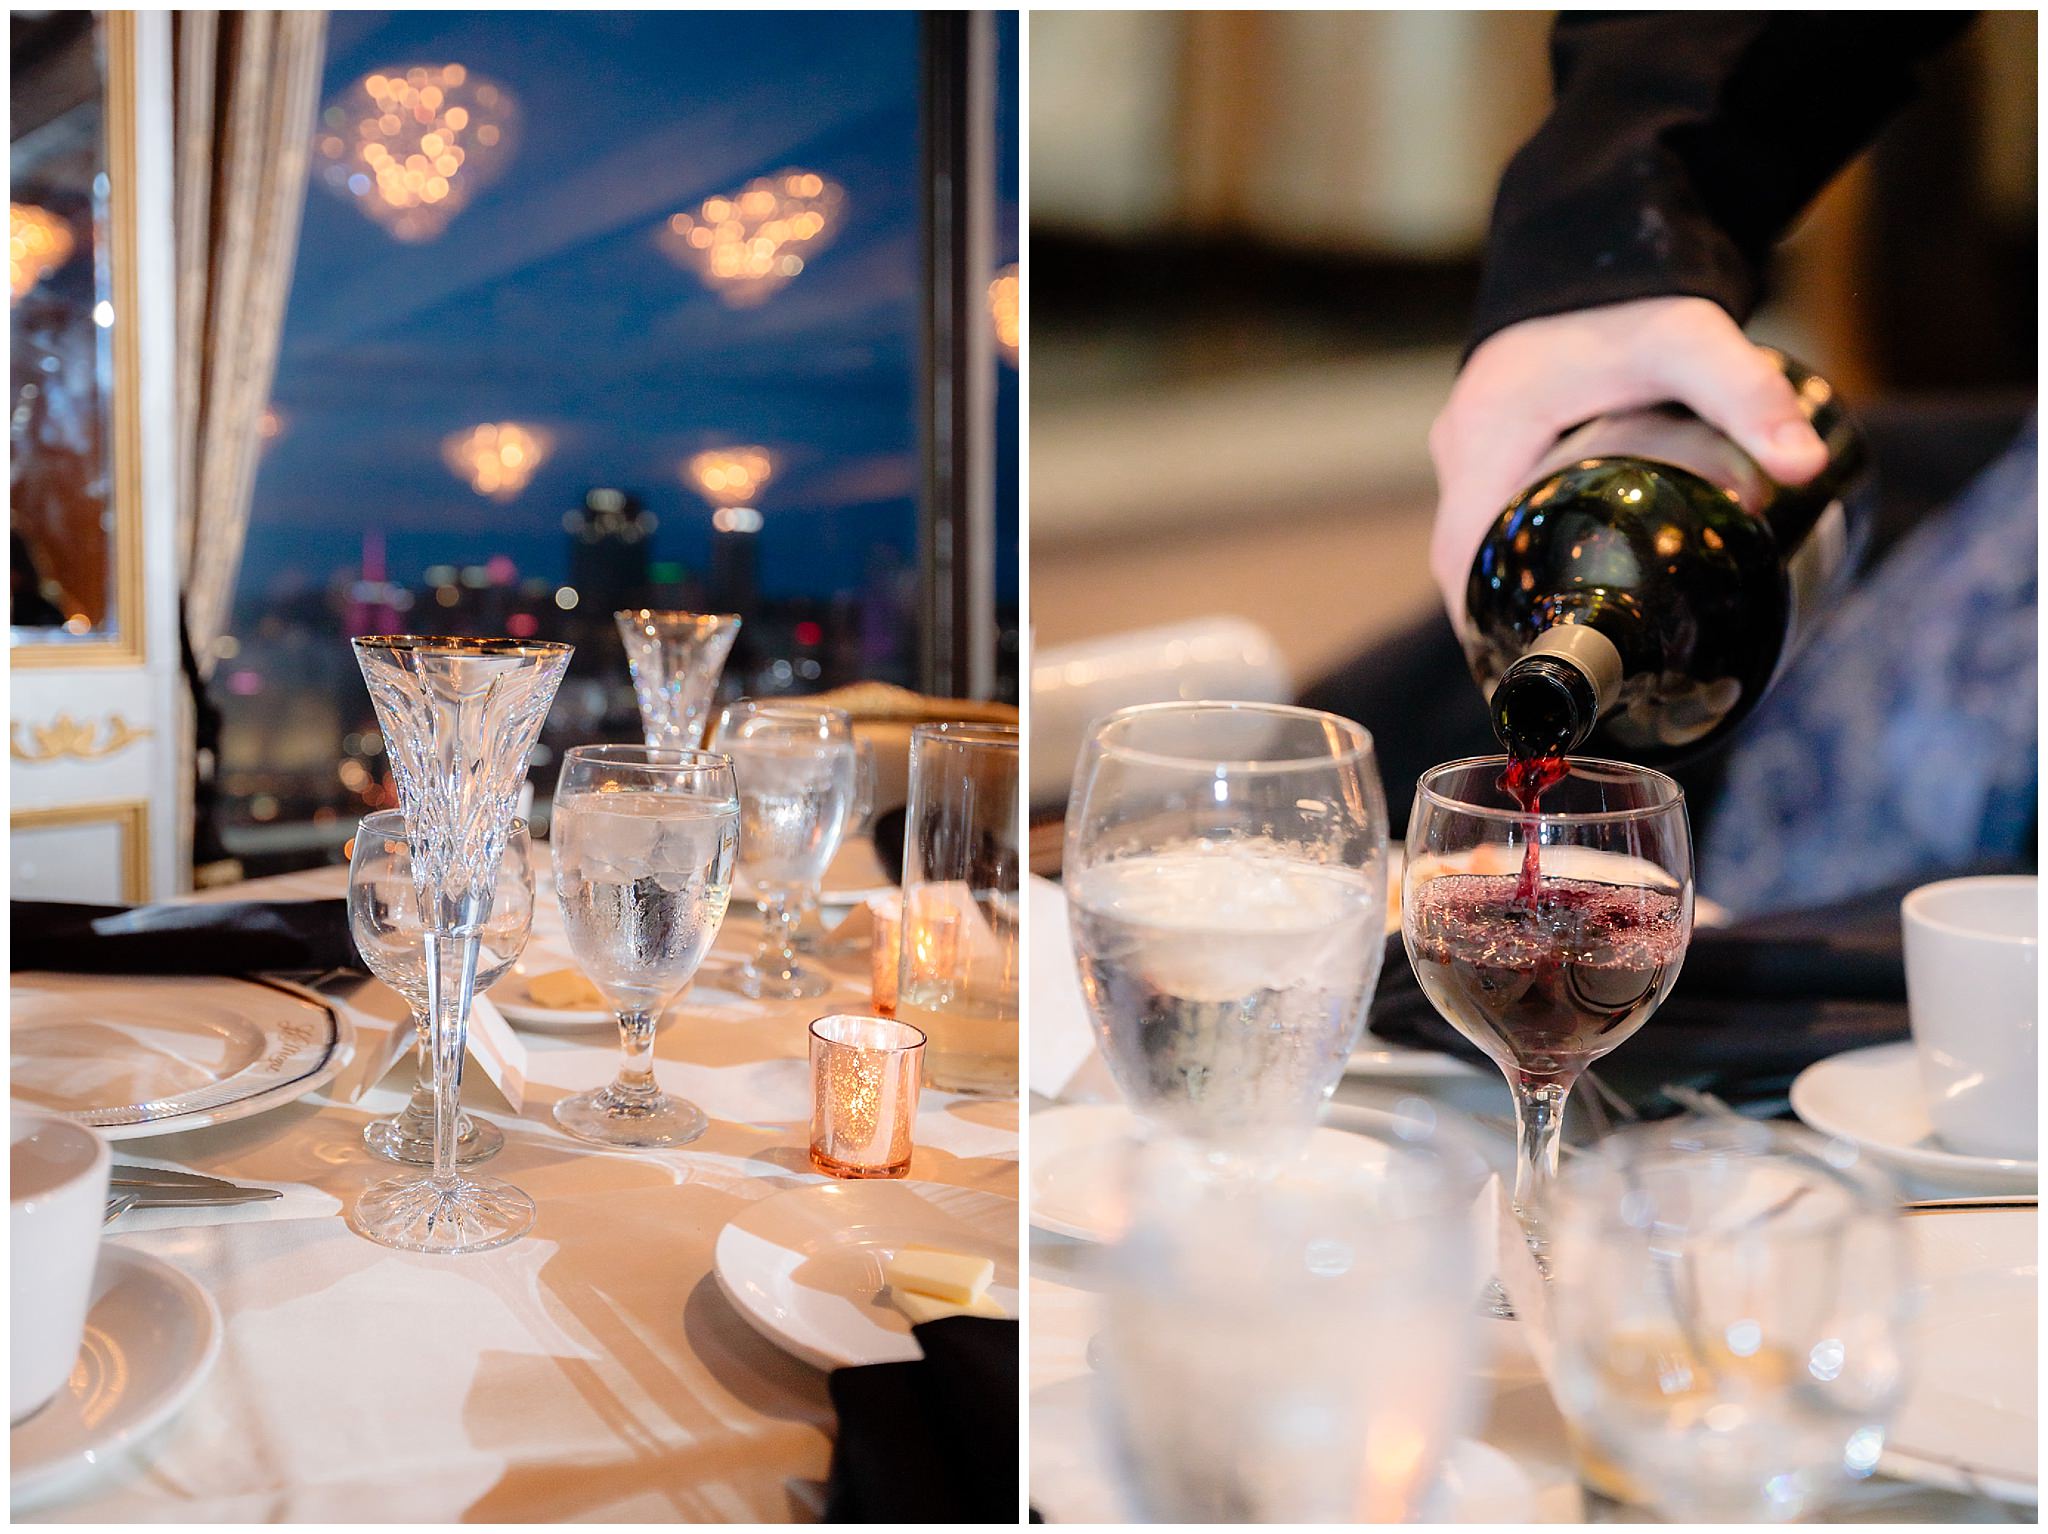 Crystal champagne flutes and a waiter pours wine at the LeMont